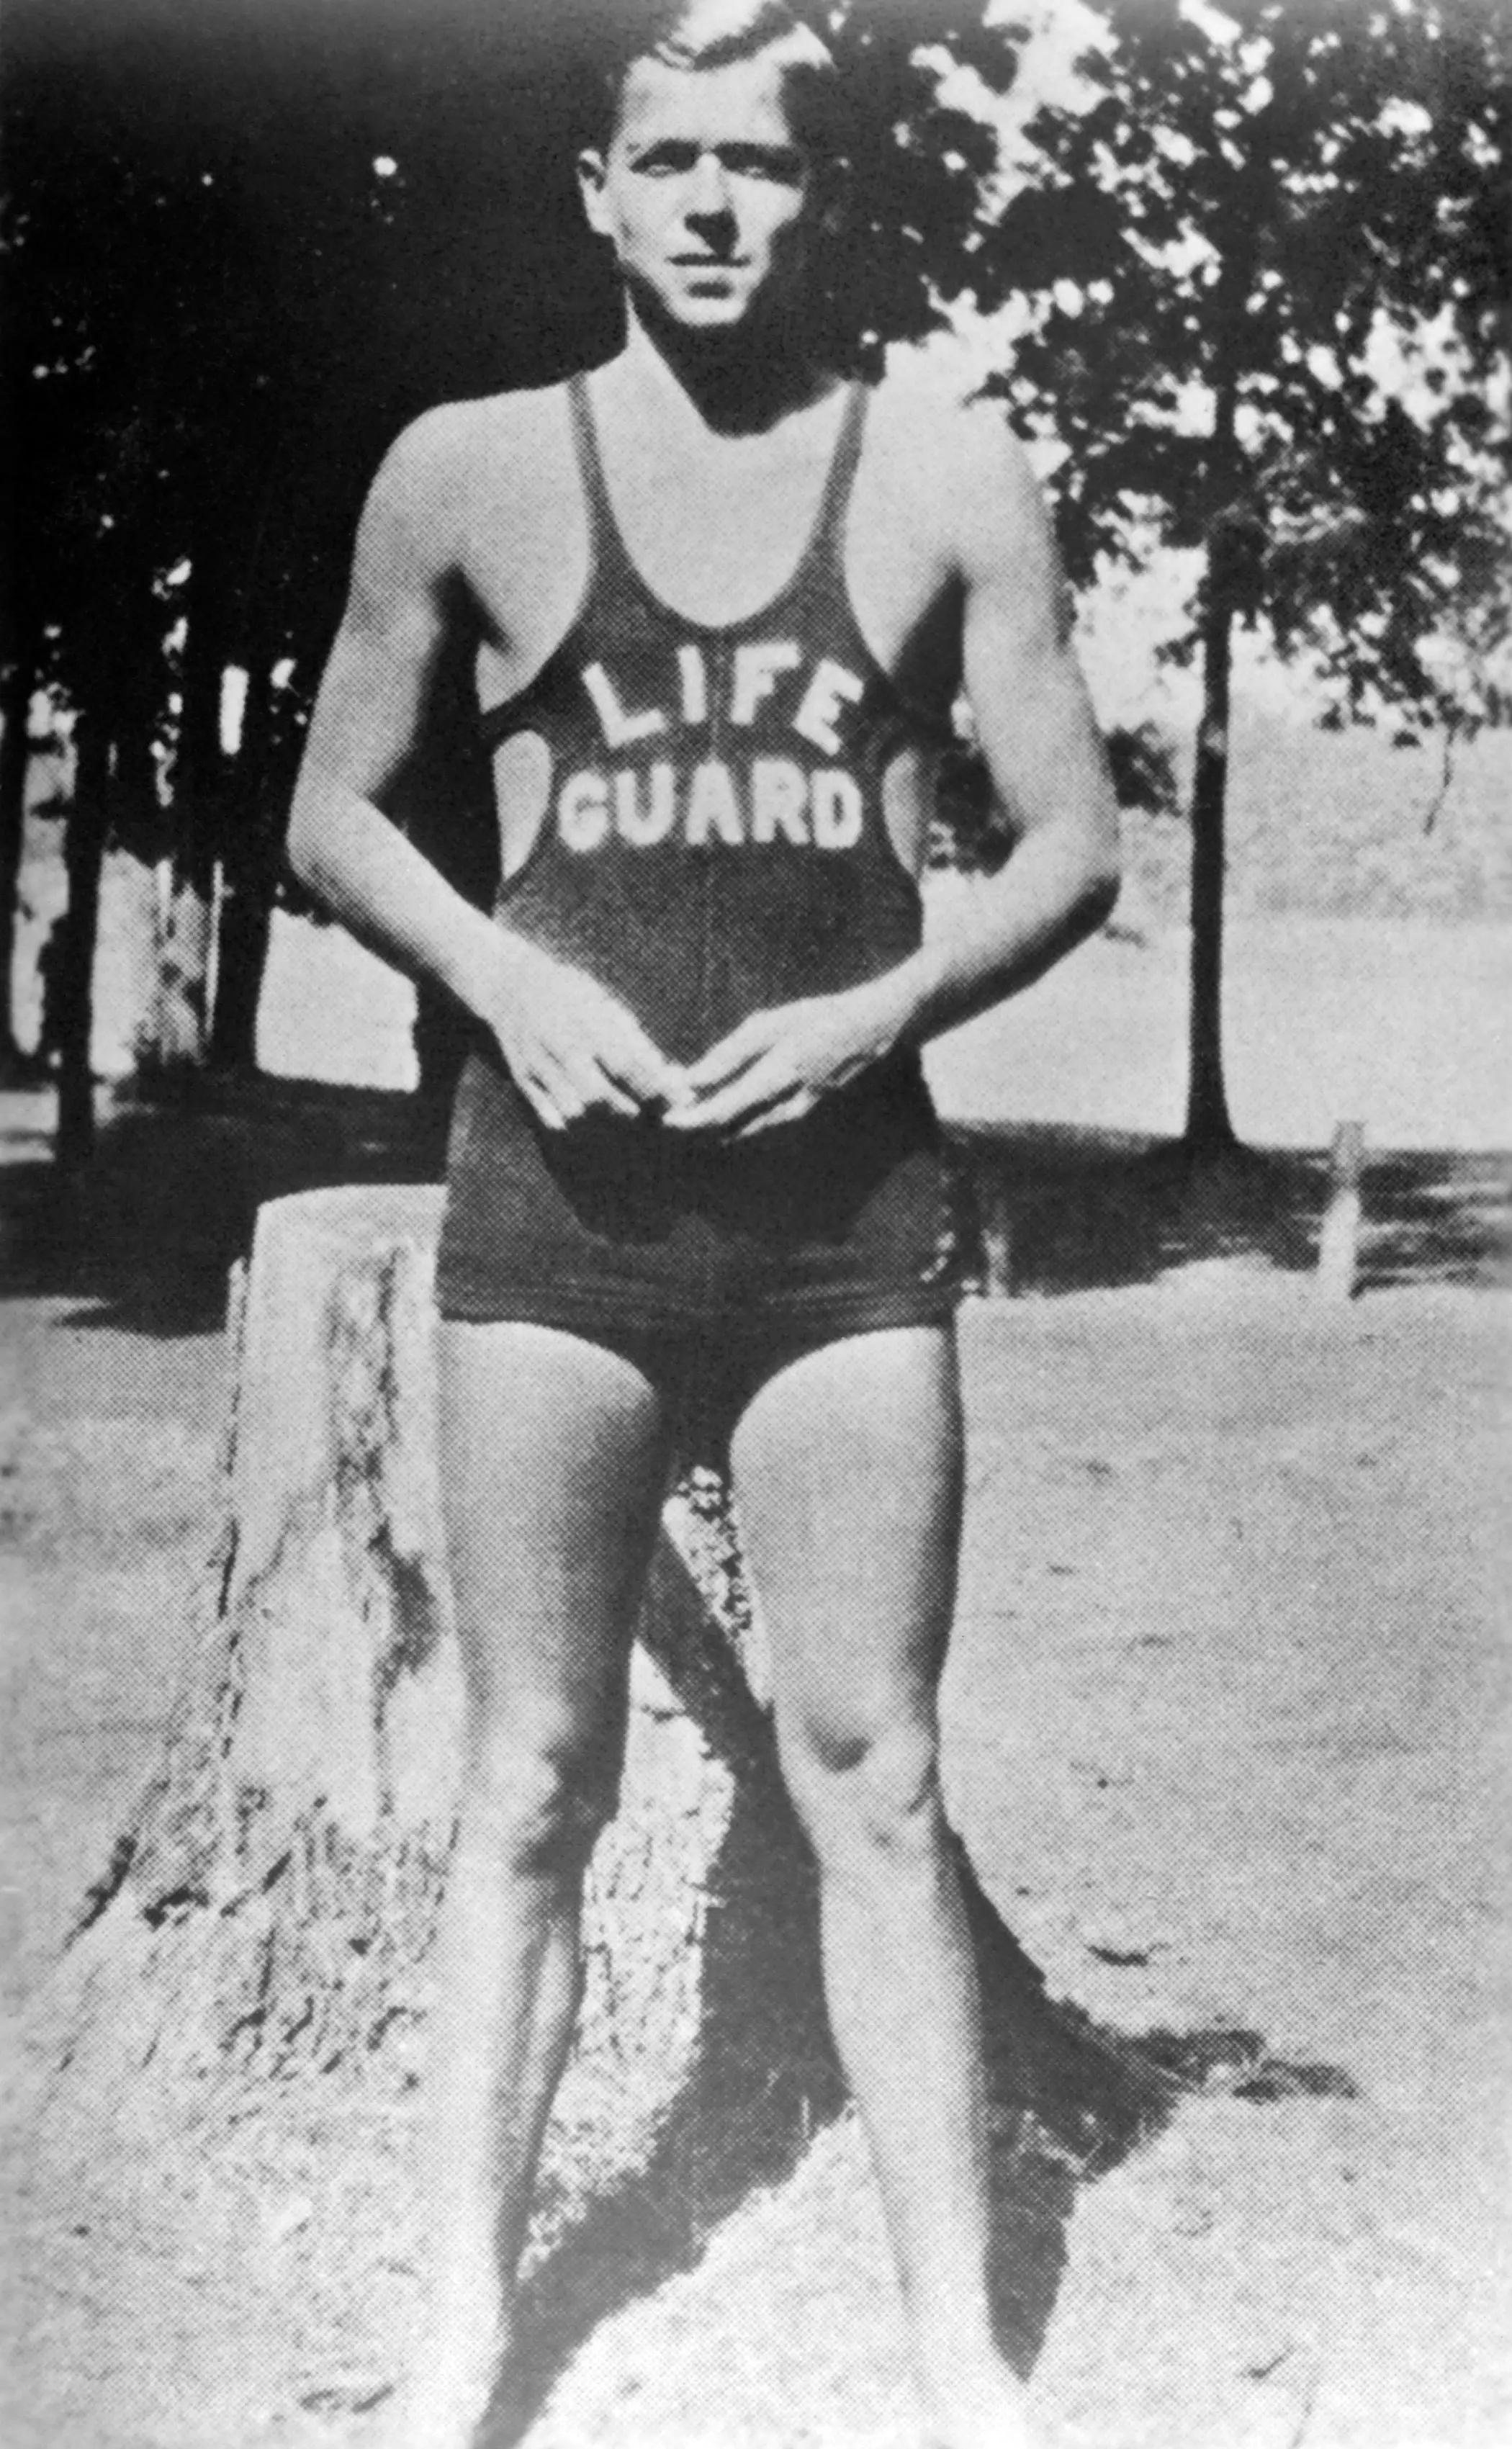 Ronald Reagan worked as a lifeguard at Lowell Park in Dixon, Illinois, in the summer of 1927.